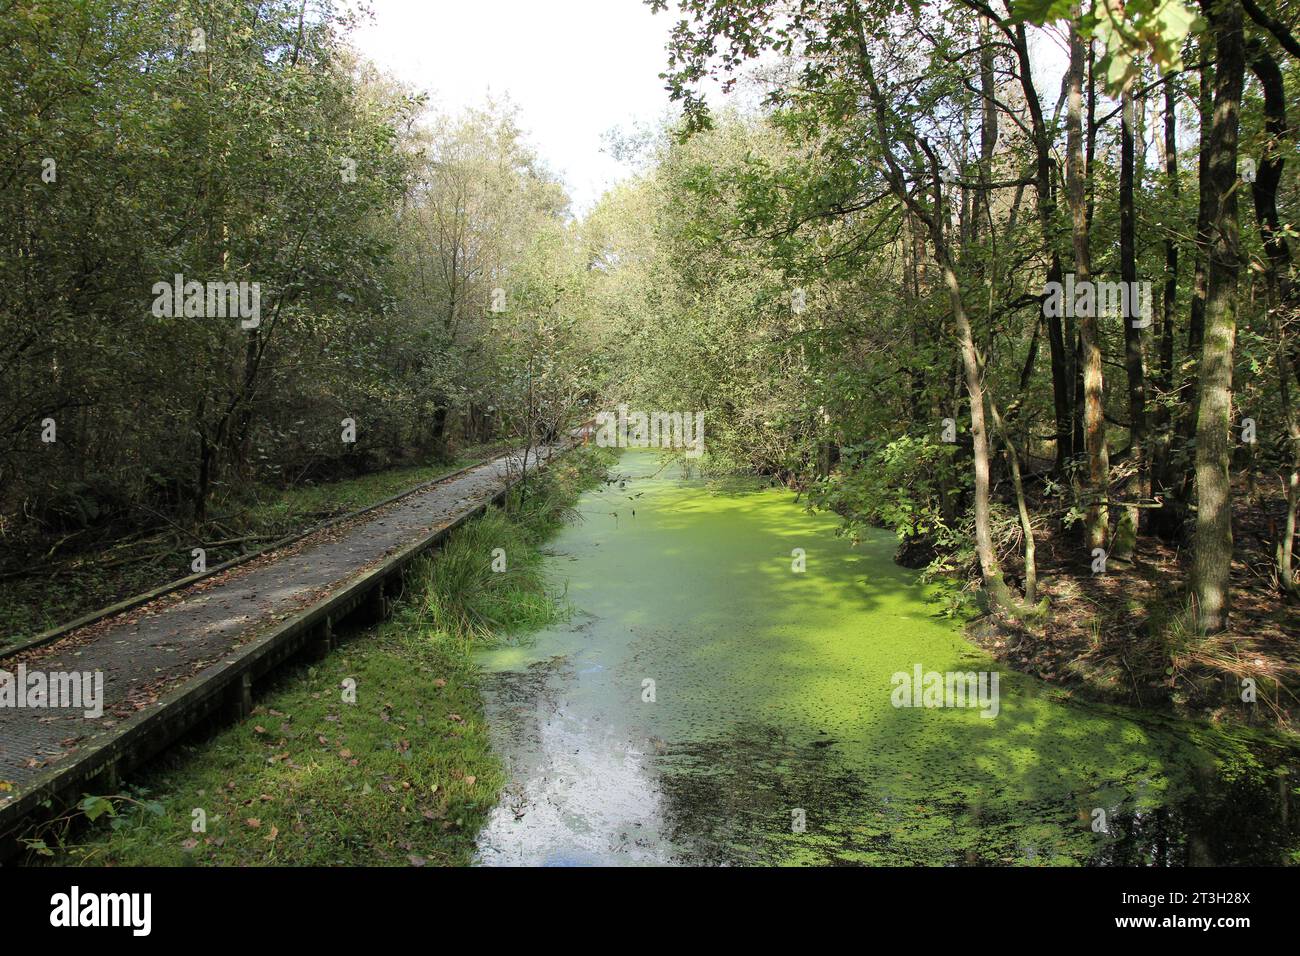 a raised walkway over a pool with water and duckweed in swamp forest with alder and birch trees in autumn Stock Photo